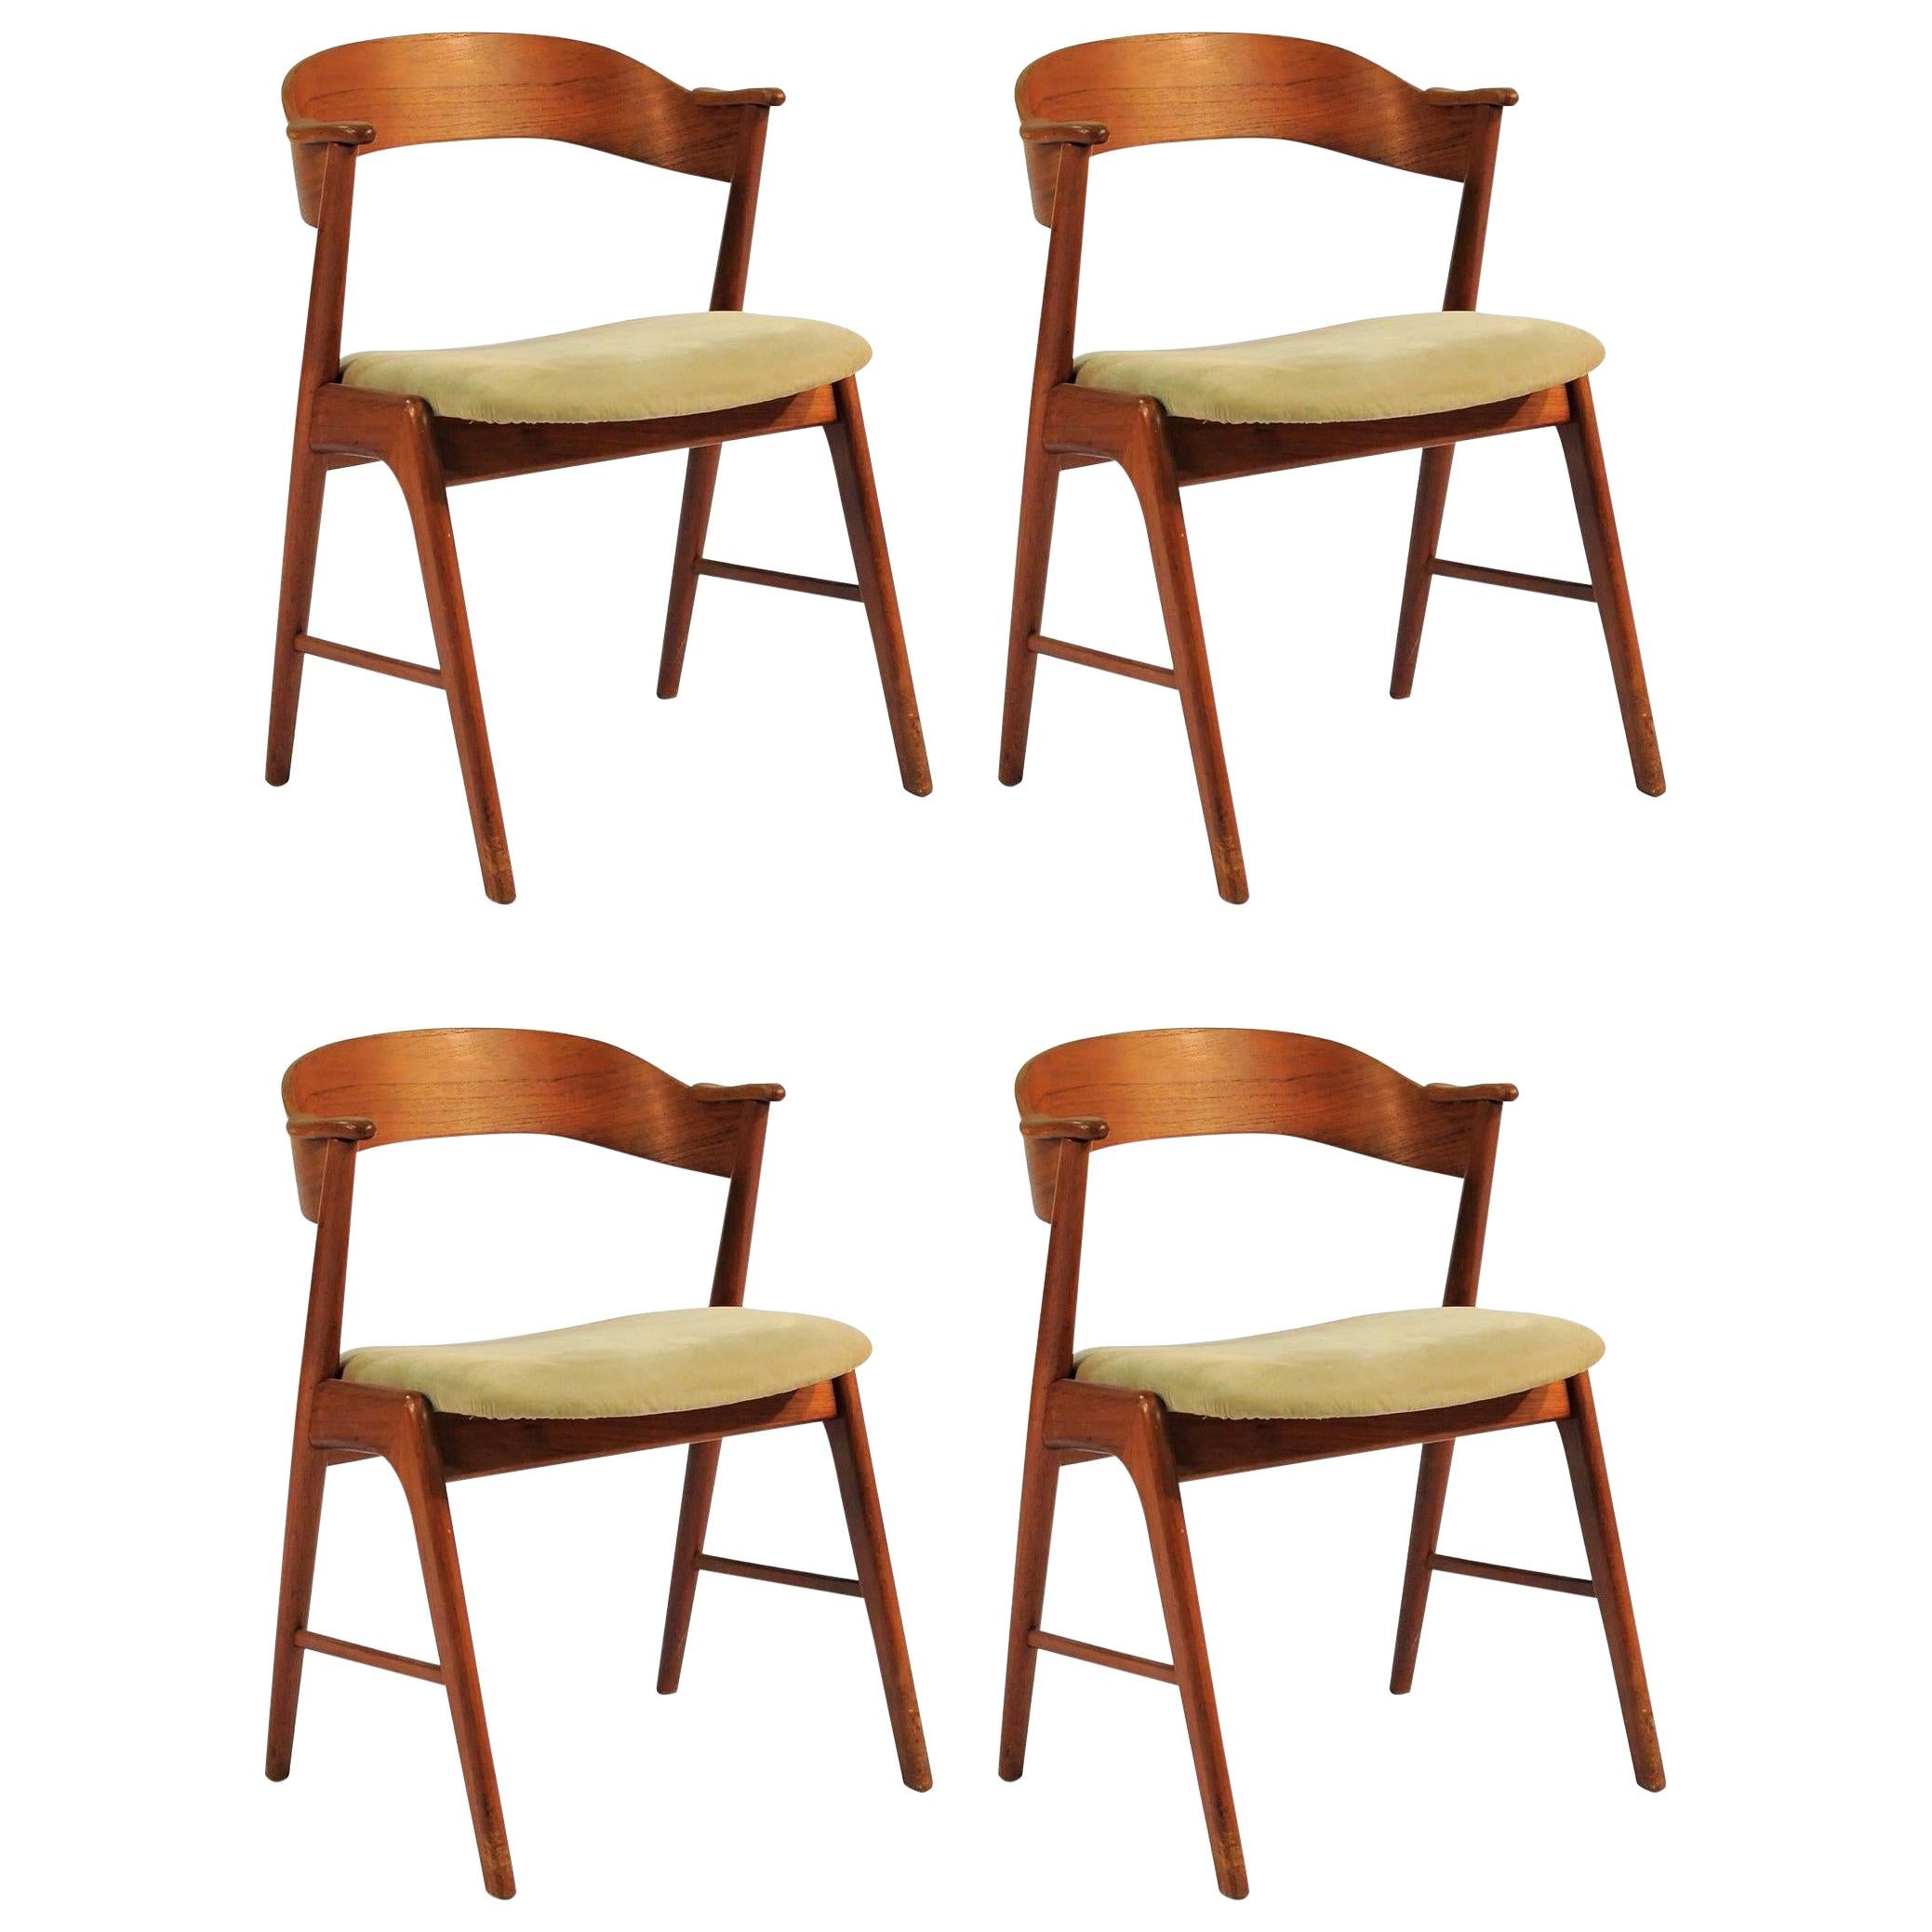 1960s Two Danish Teak Dining Chairs Known as Model 32, Inc. Reupholstery